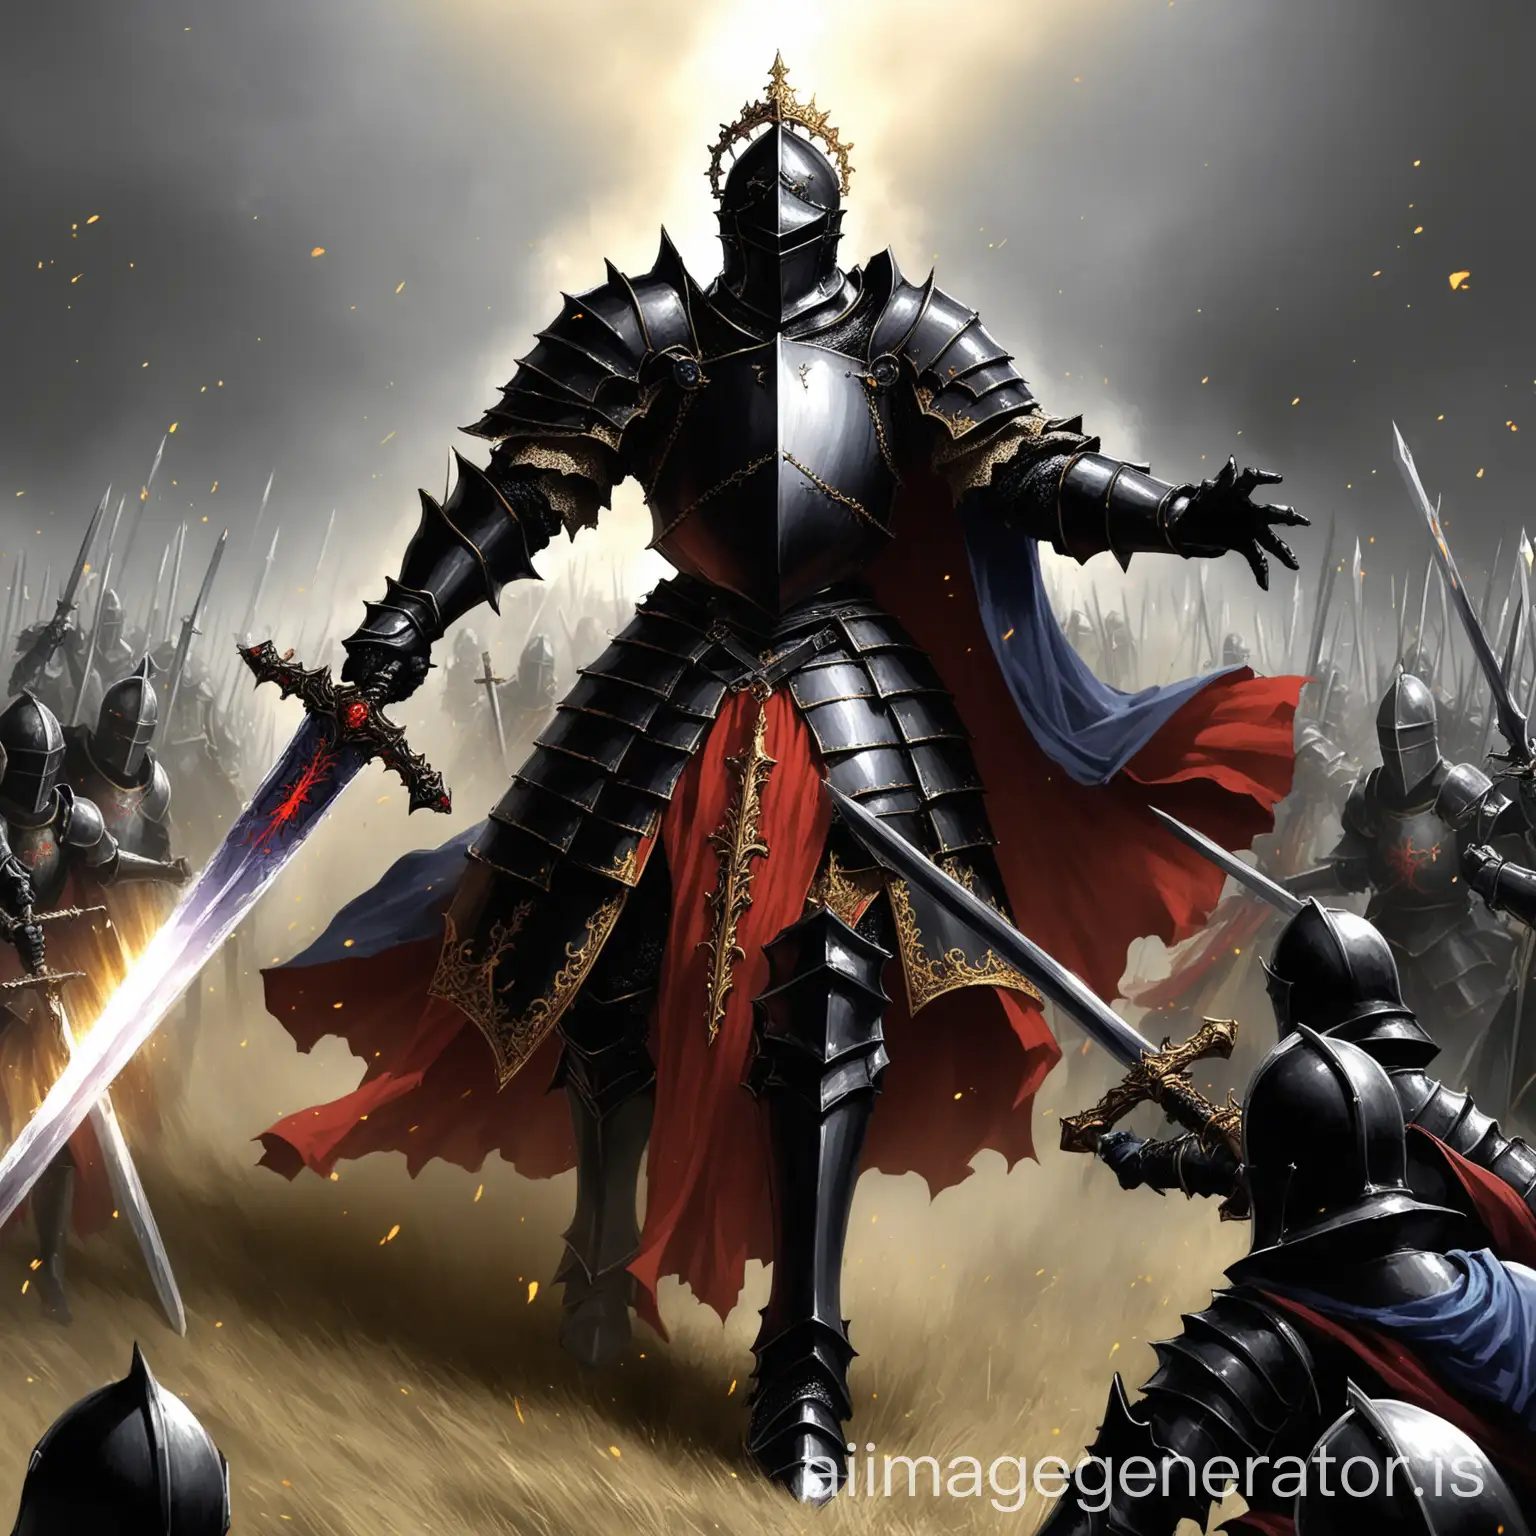 male black knight leading charge with great sword